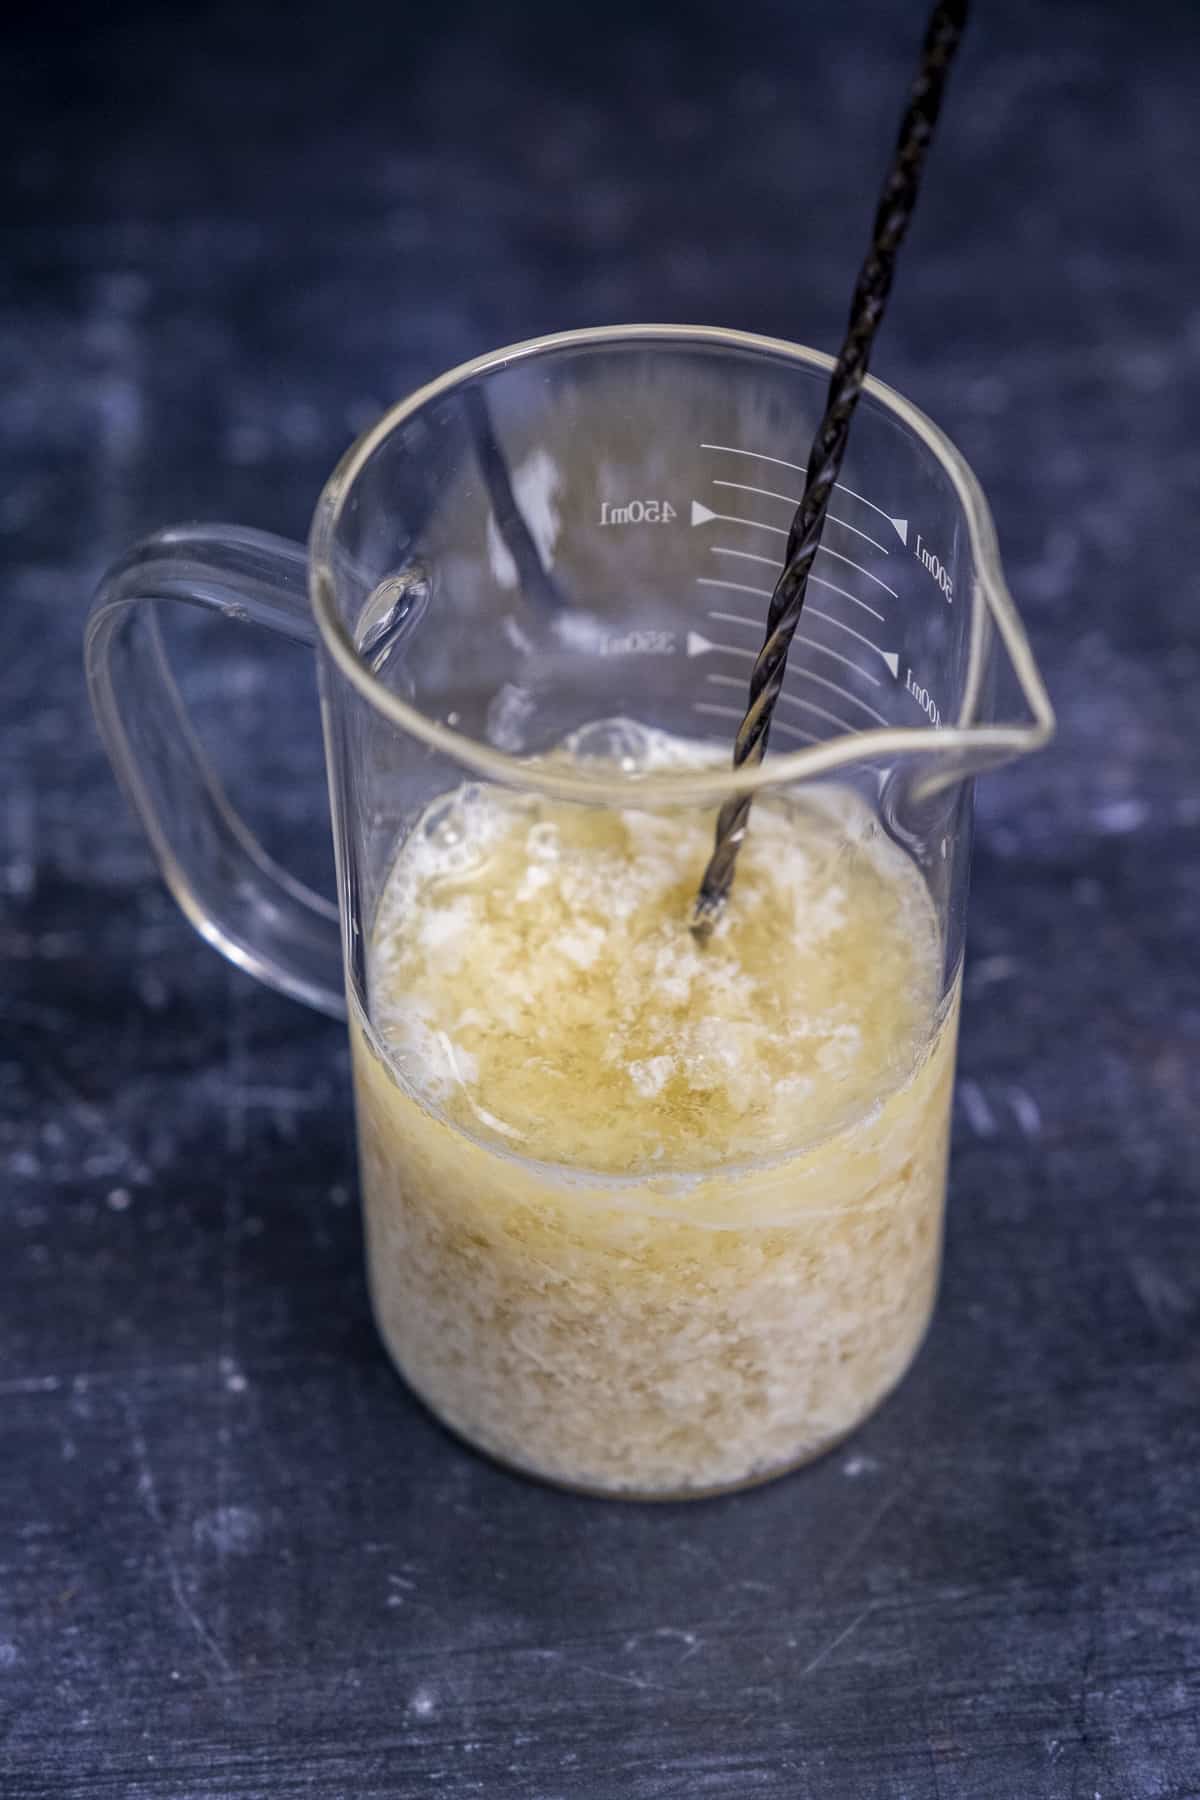 Almond milk and vinegar mixture in a glass measuring cup and a stirring spoon inside it.